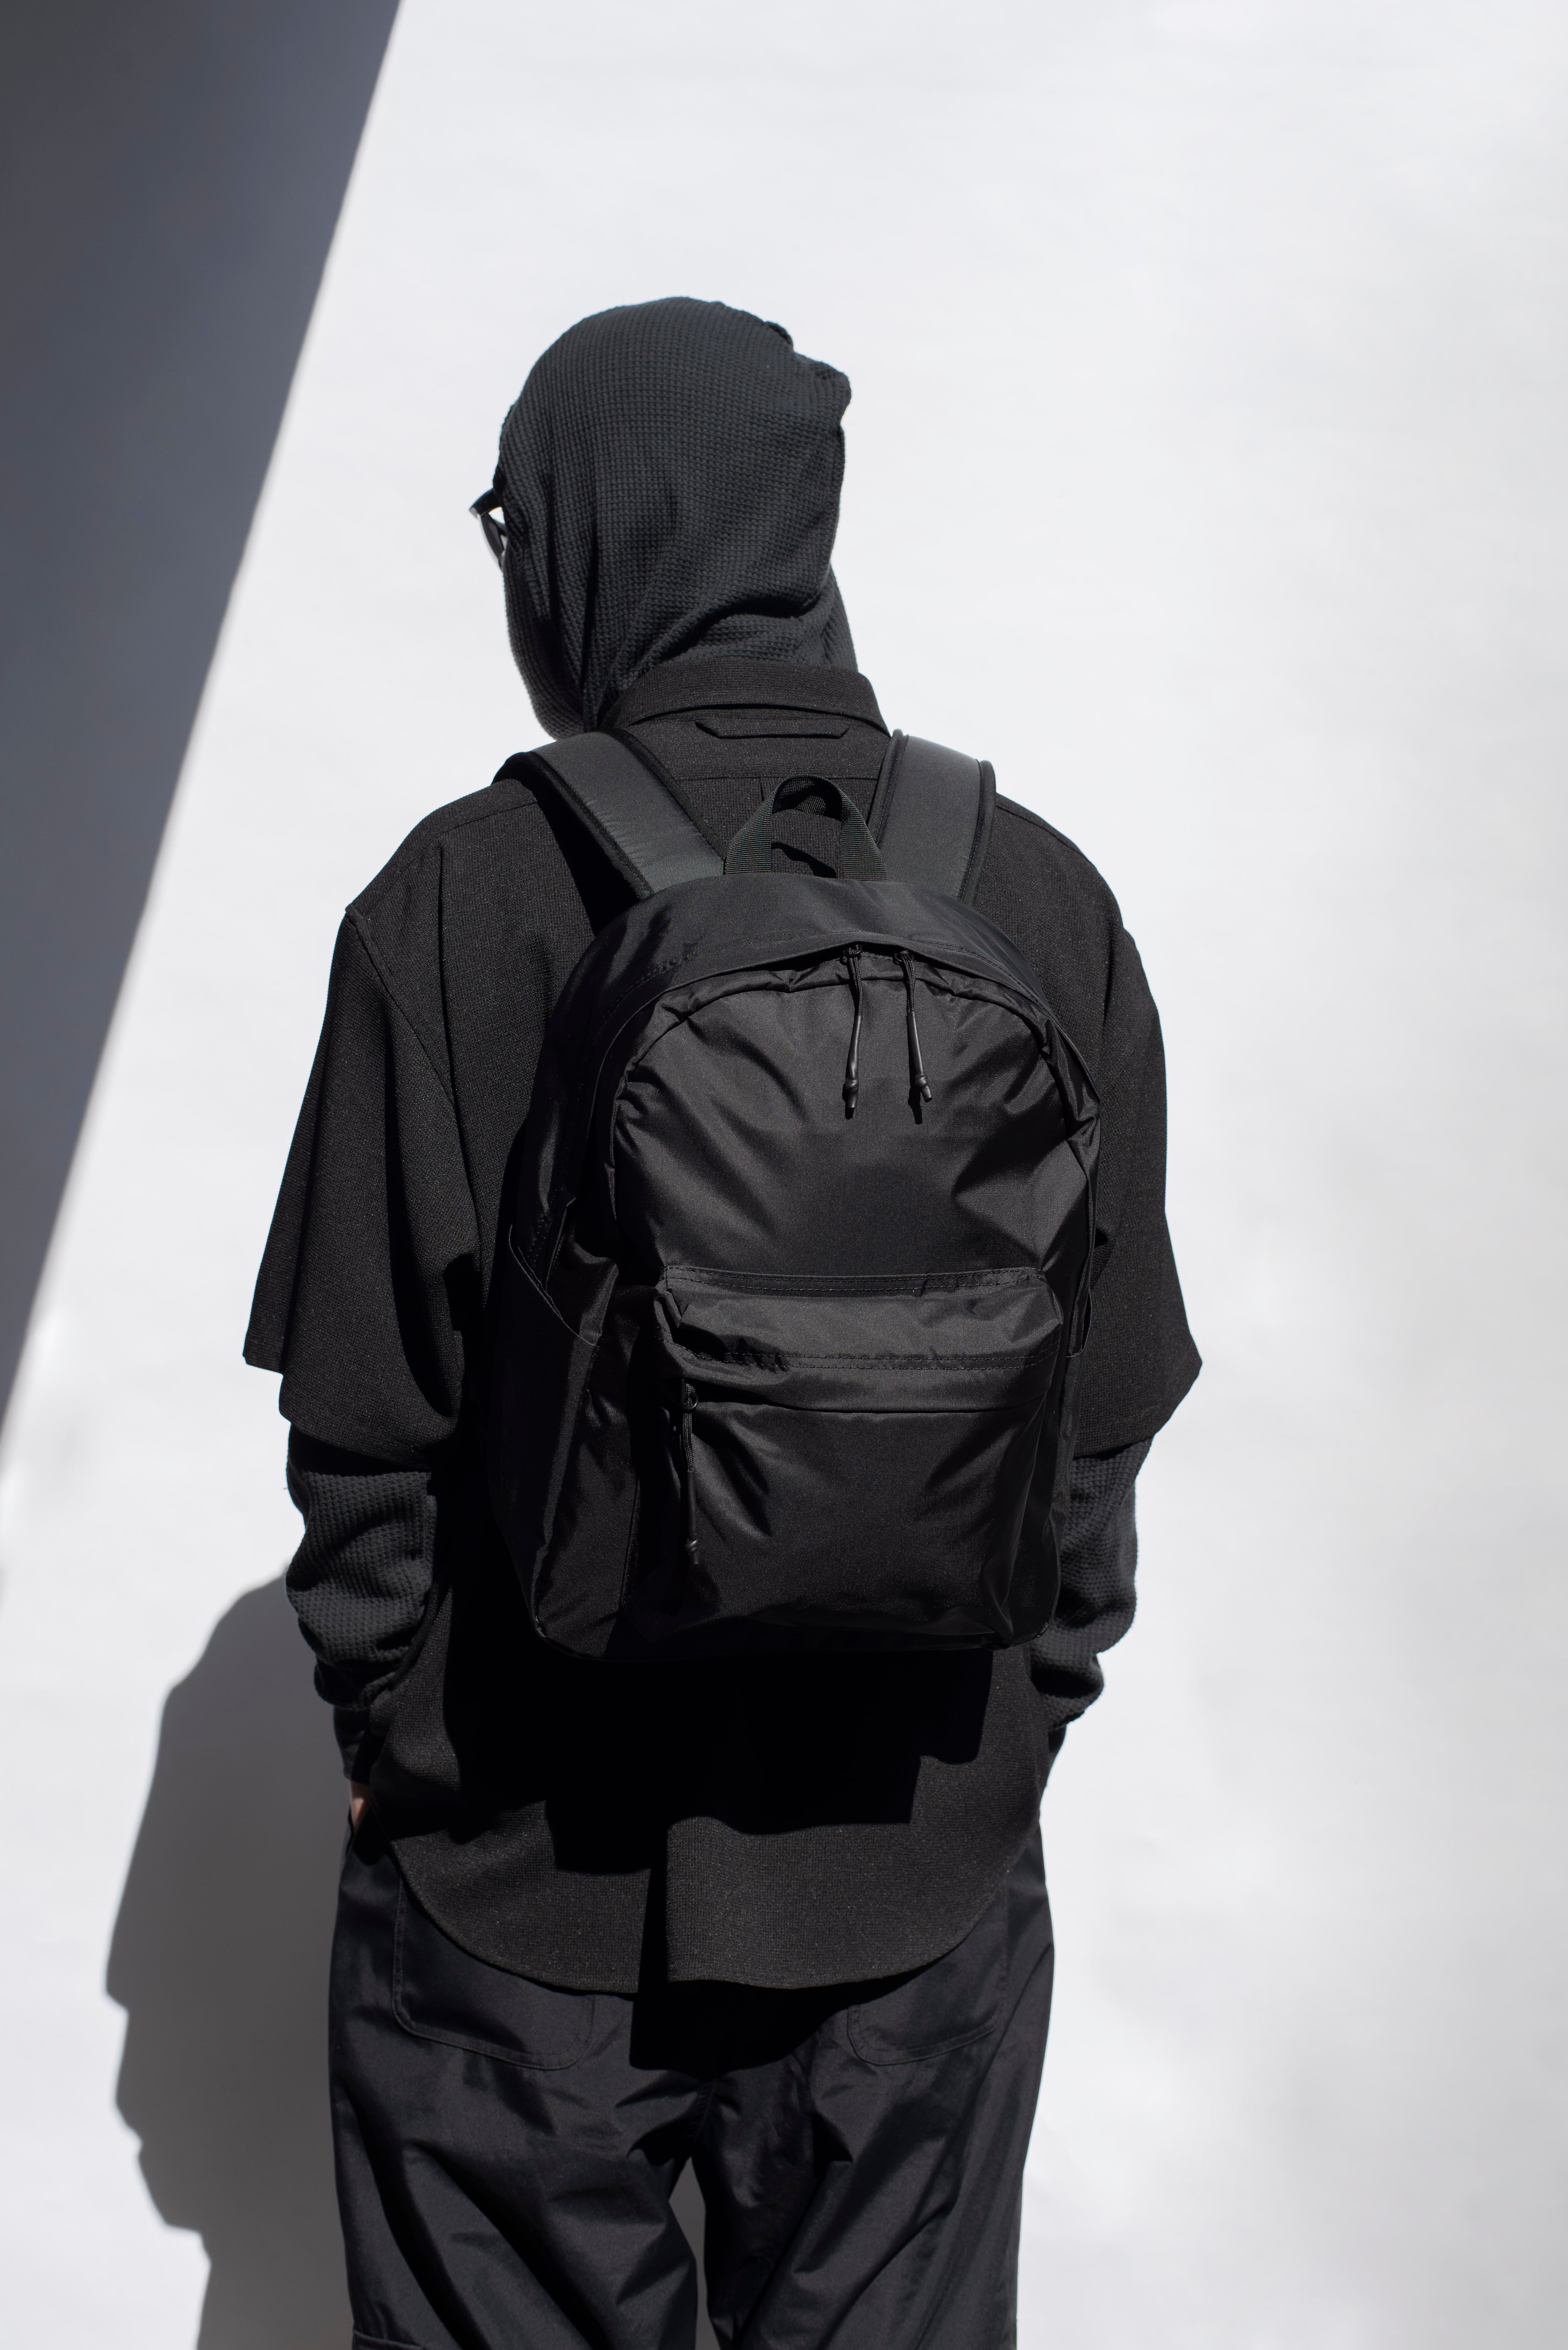 BAICYCLON BCL-14 Day Pack WISE clothing